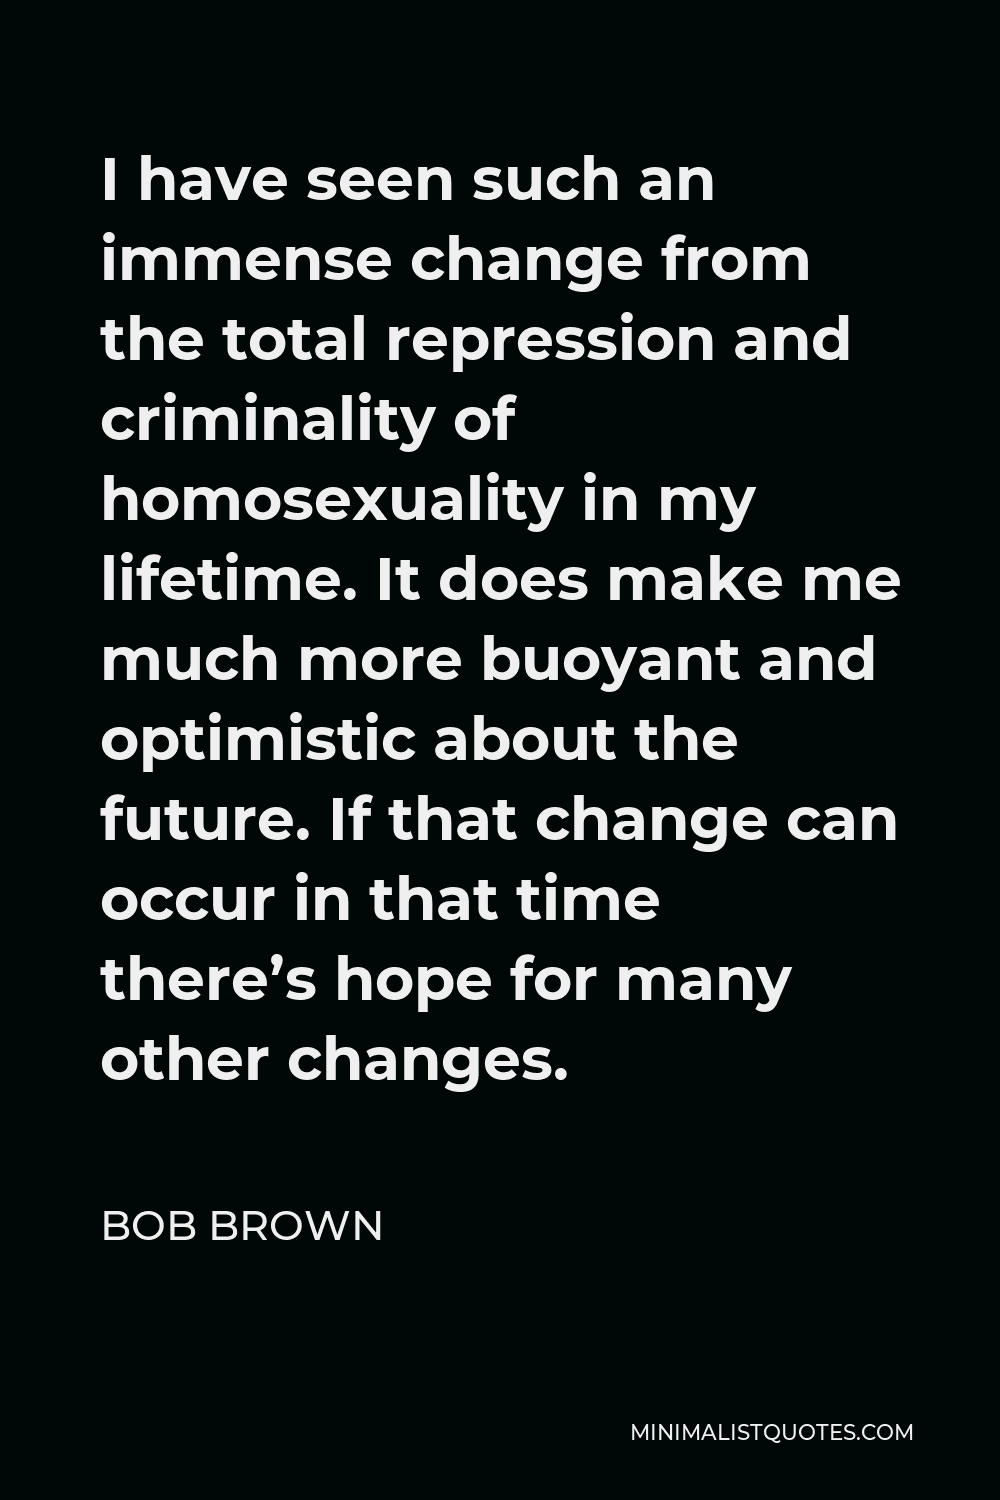 Bob Brown Quote - I have seen such an immense change from the total repression and criminality of homosexuality in my lifetime. It does make me much more buoyant and optimistic about the future. If that change can occur in that time there’s hope for many other changes.